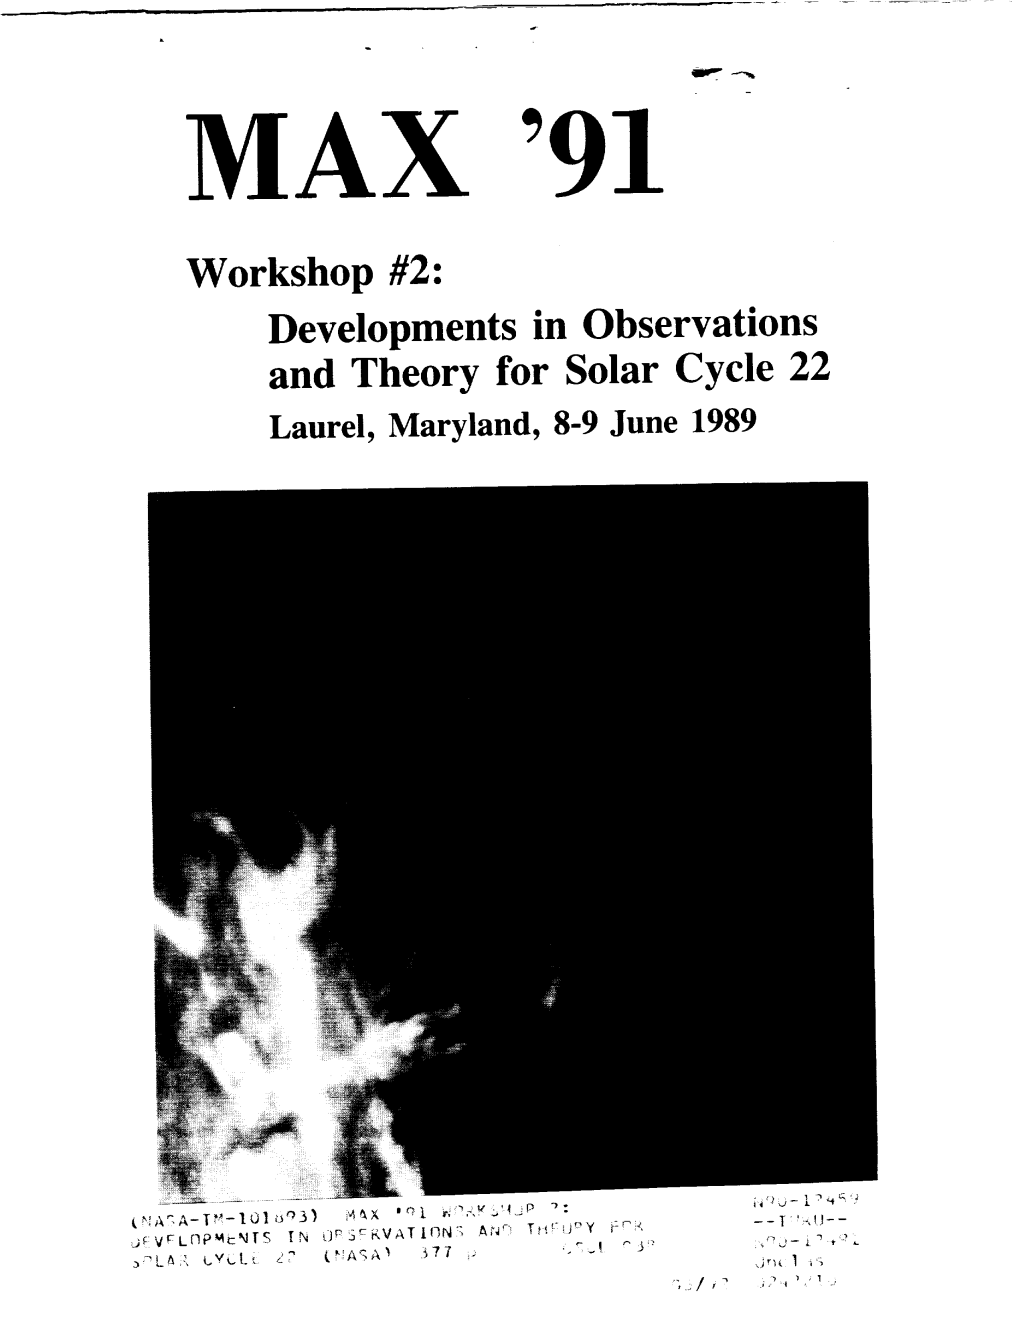 Developments in Observations and Theory for Solar Cycle 22 Laurel, Maryland, 8-9 June 1989